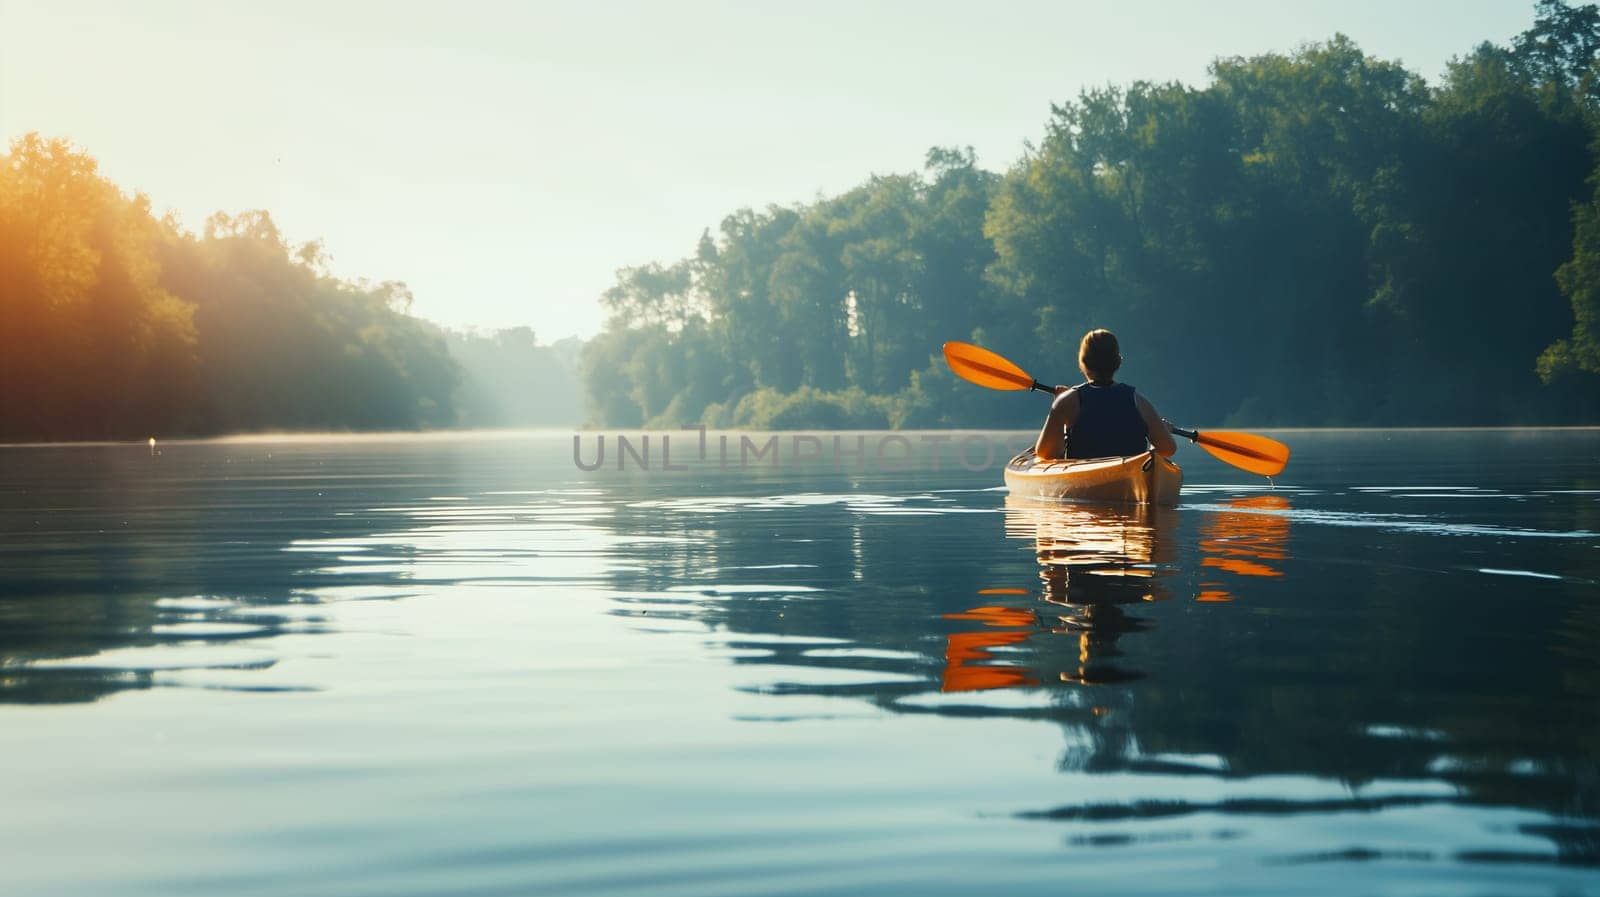 Solitary Kayaker Paddles on a Serene Lake at Golden Hour by chrisroll